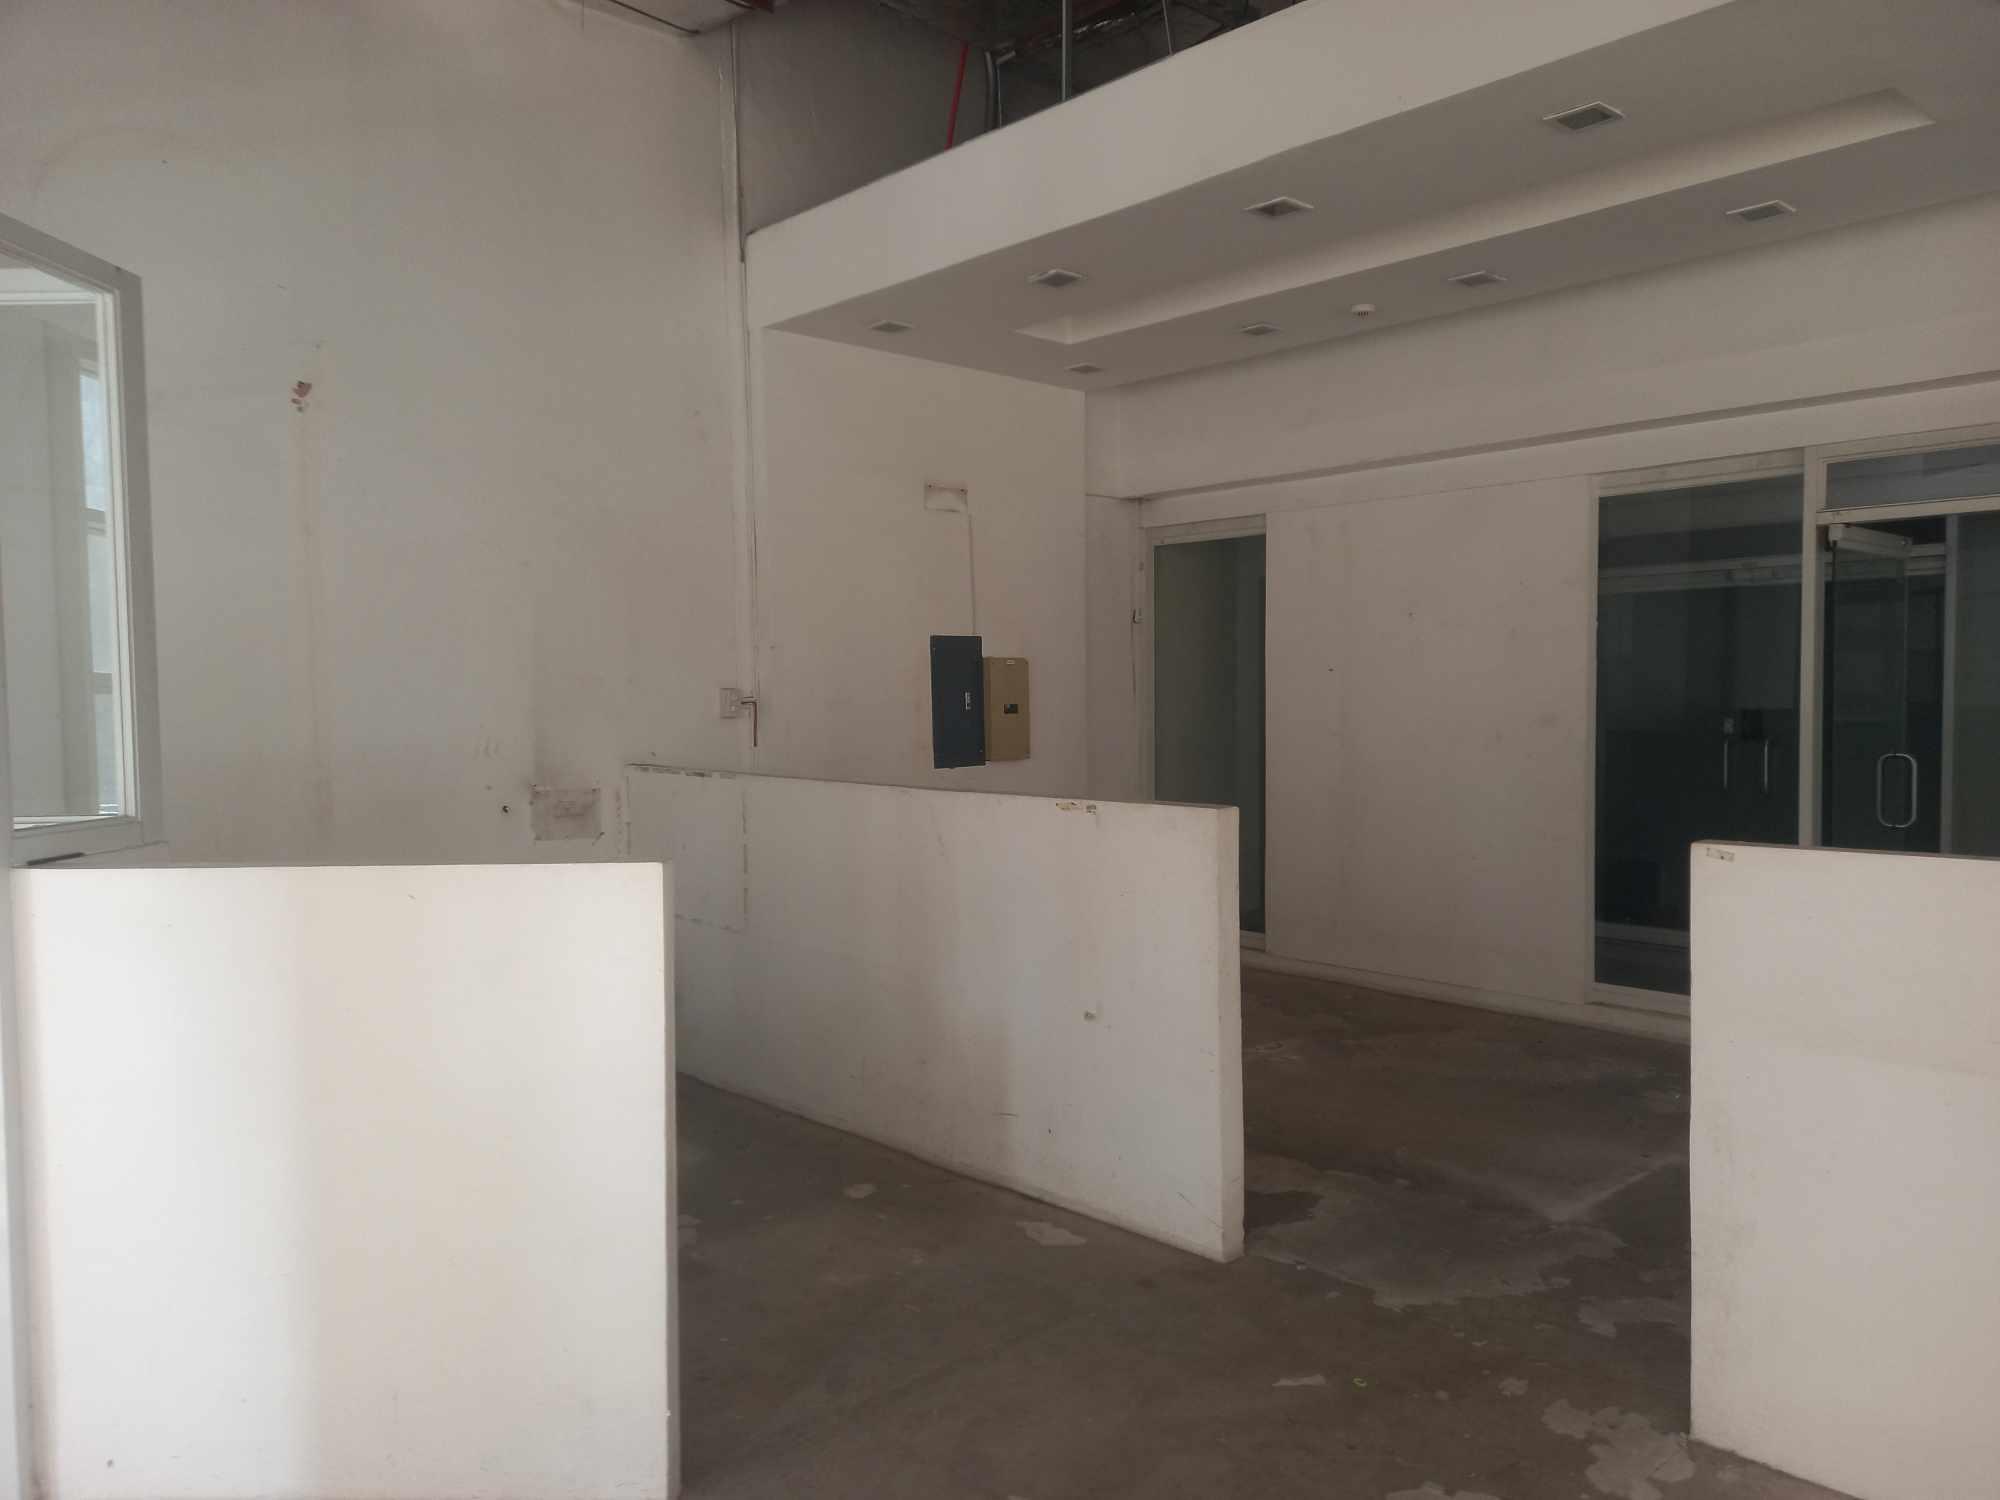 For Rent Lease Office Space 80 sqm Mandaluyong City Manila